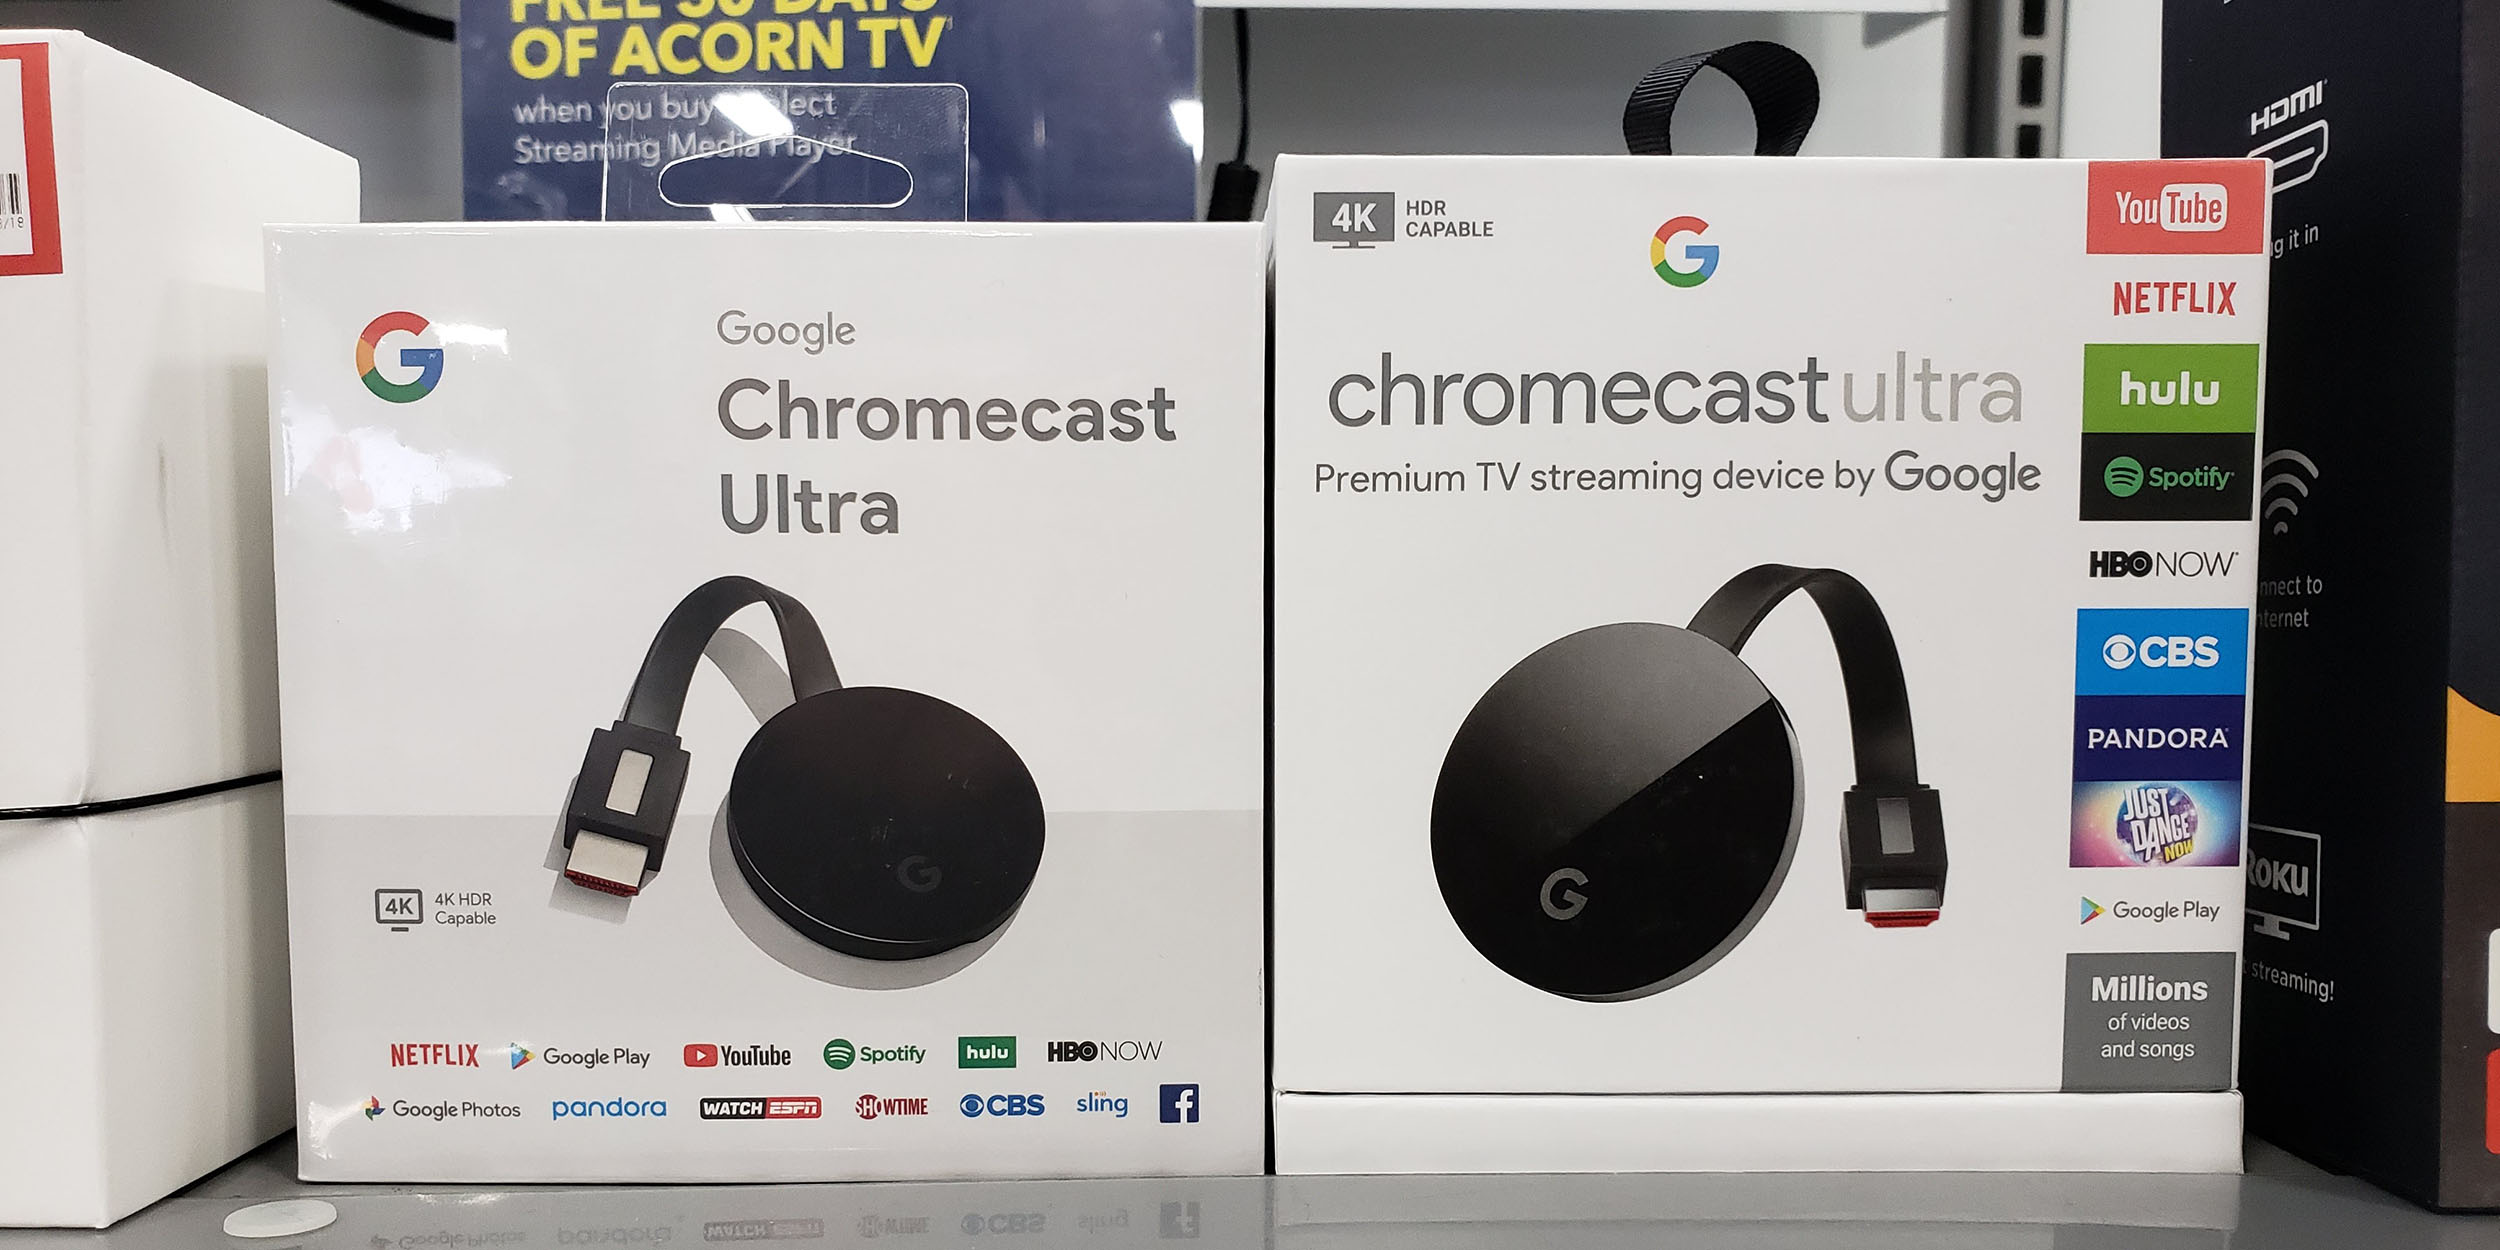 Chromecast Ultra Unboxing, Setup and Demo with Google Home 